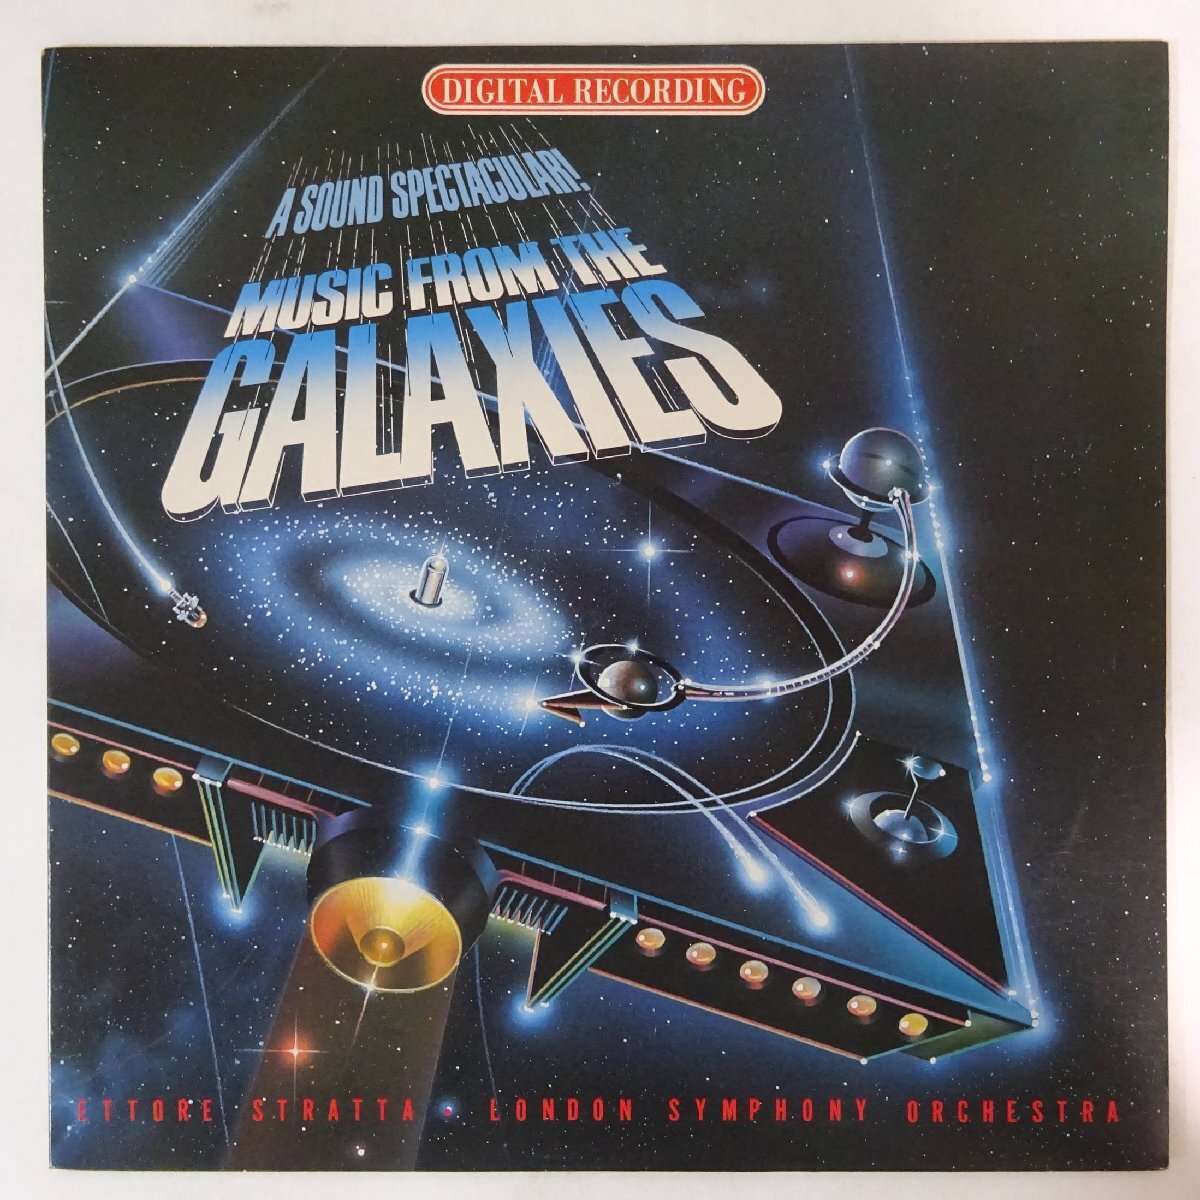 11183265;[ almost beautiful record / domestic record ]Ettore Stratta, London Symphony Orchestra / Music From The Galaxies super Daisaku SF movie main * Thema compilation 